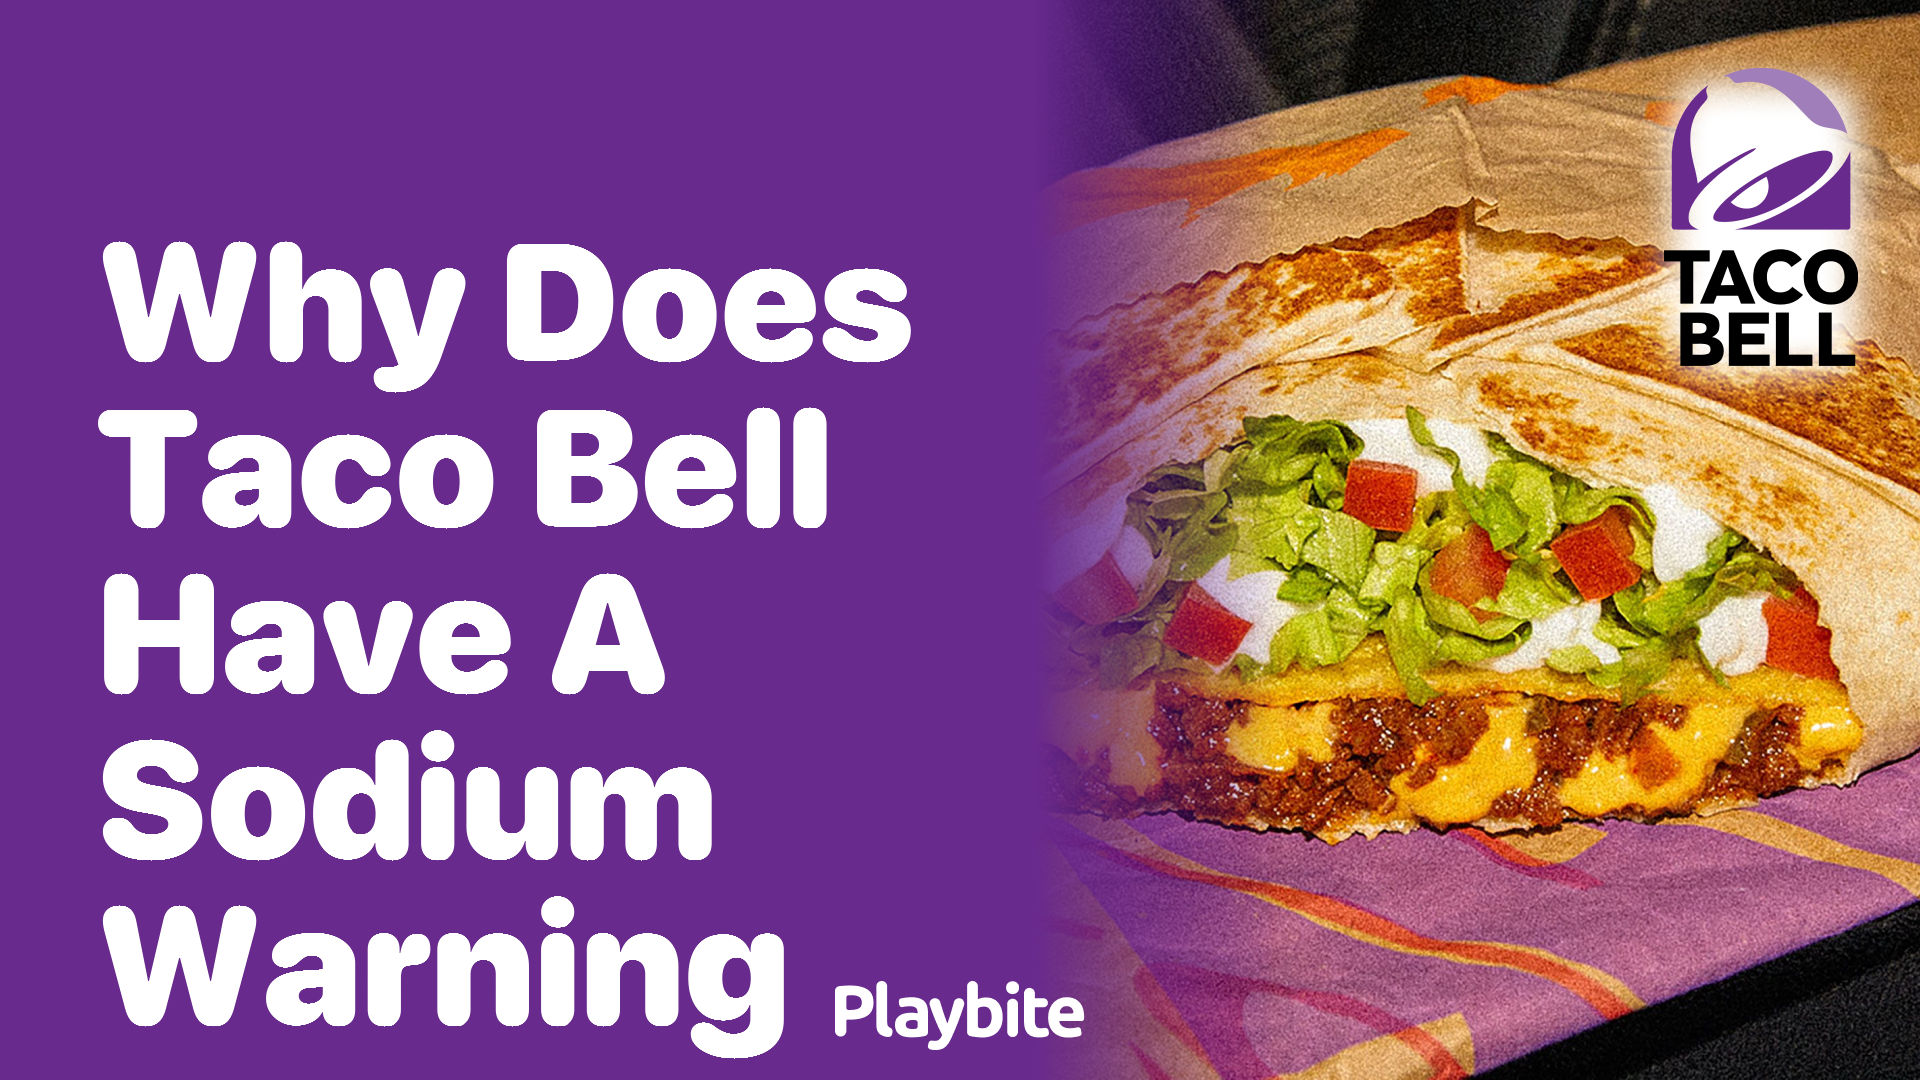 Why Does Taco Bell Have a Sodium Warning?